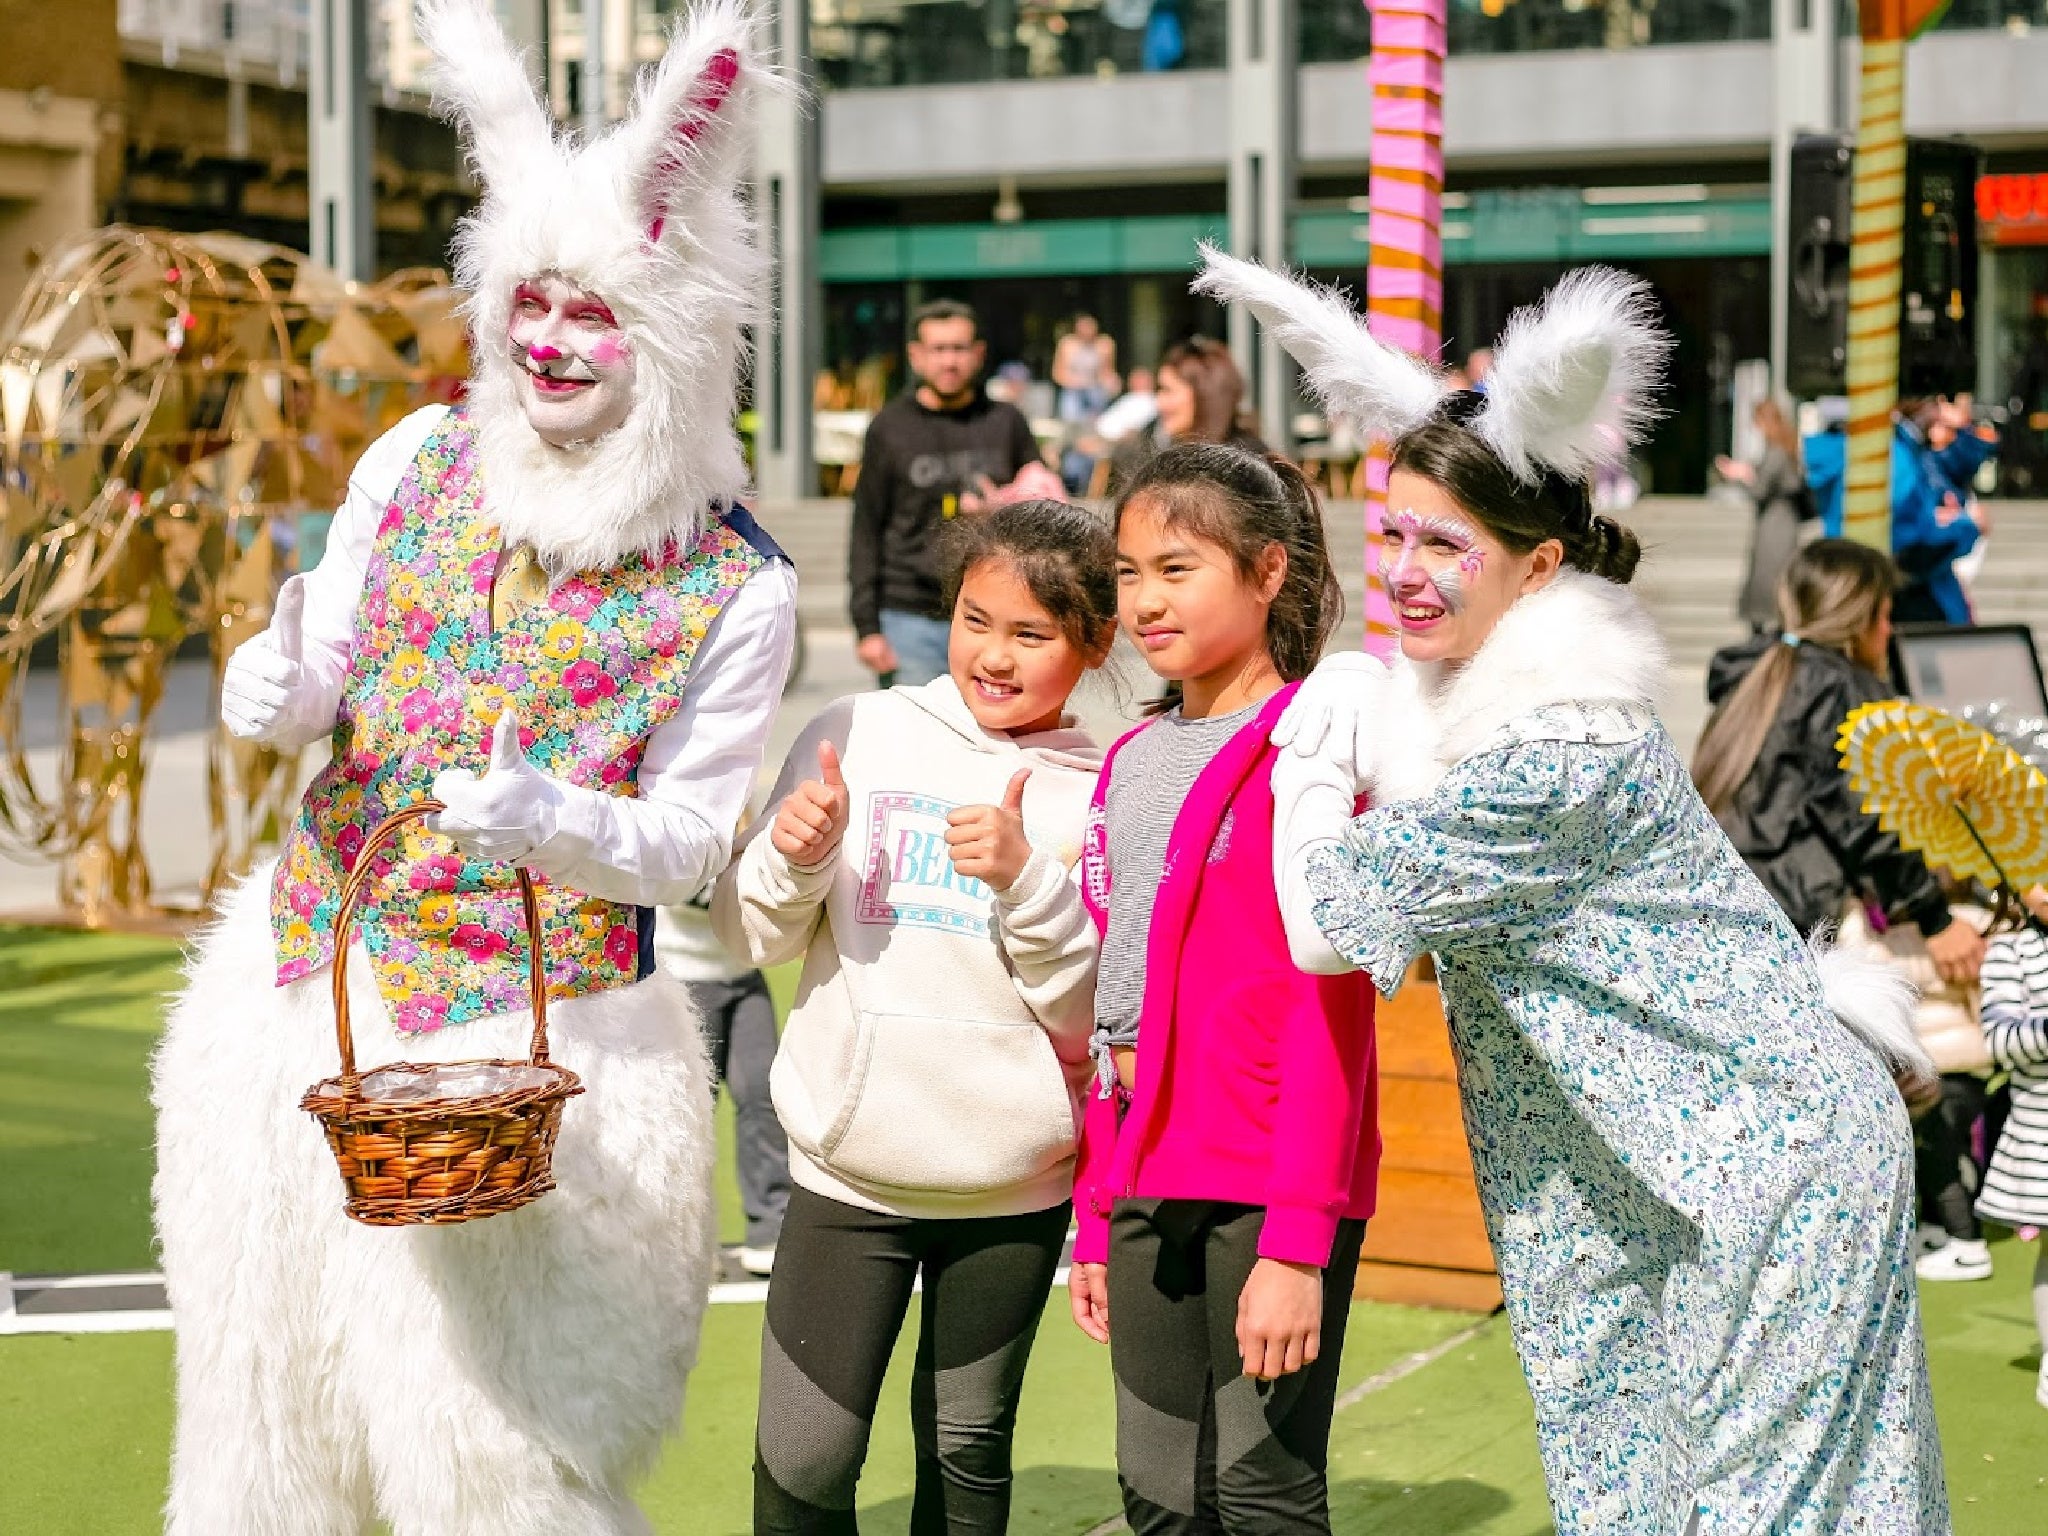 The Easter bunny will be popping up across the UK for fun hunts and trails